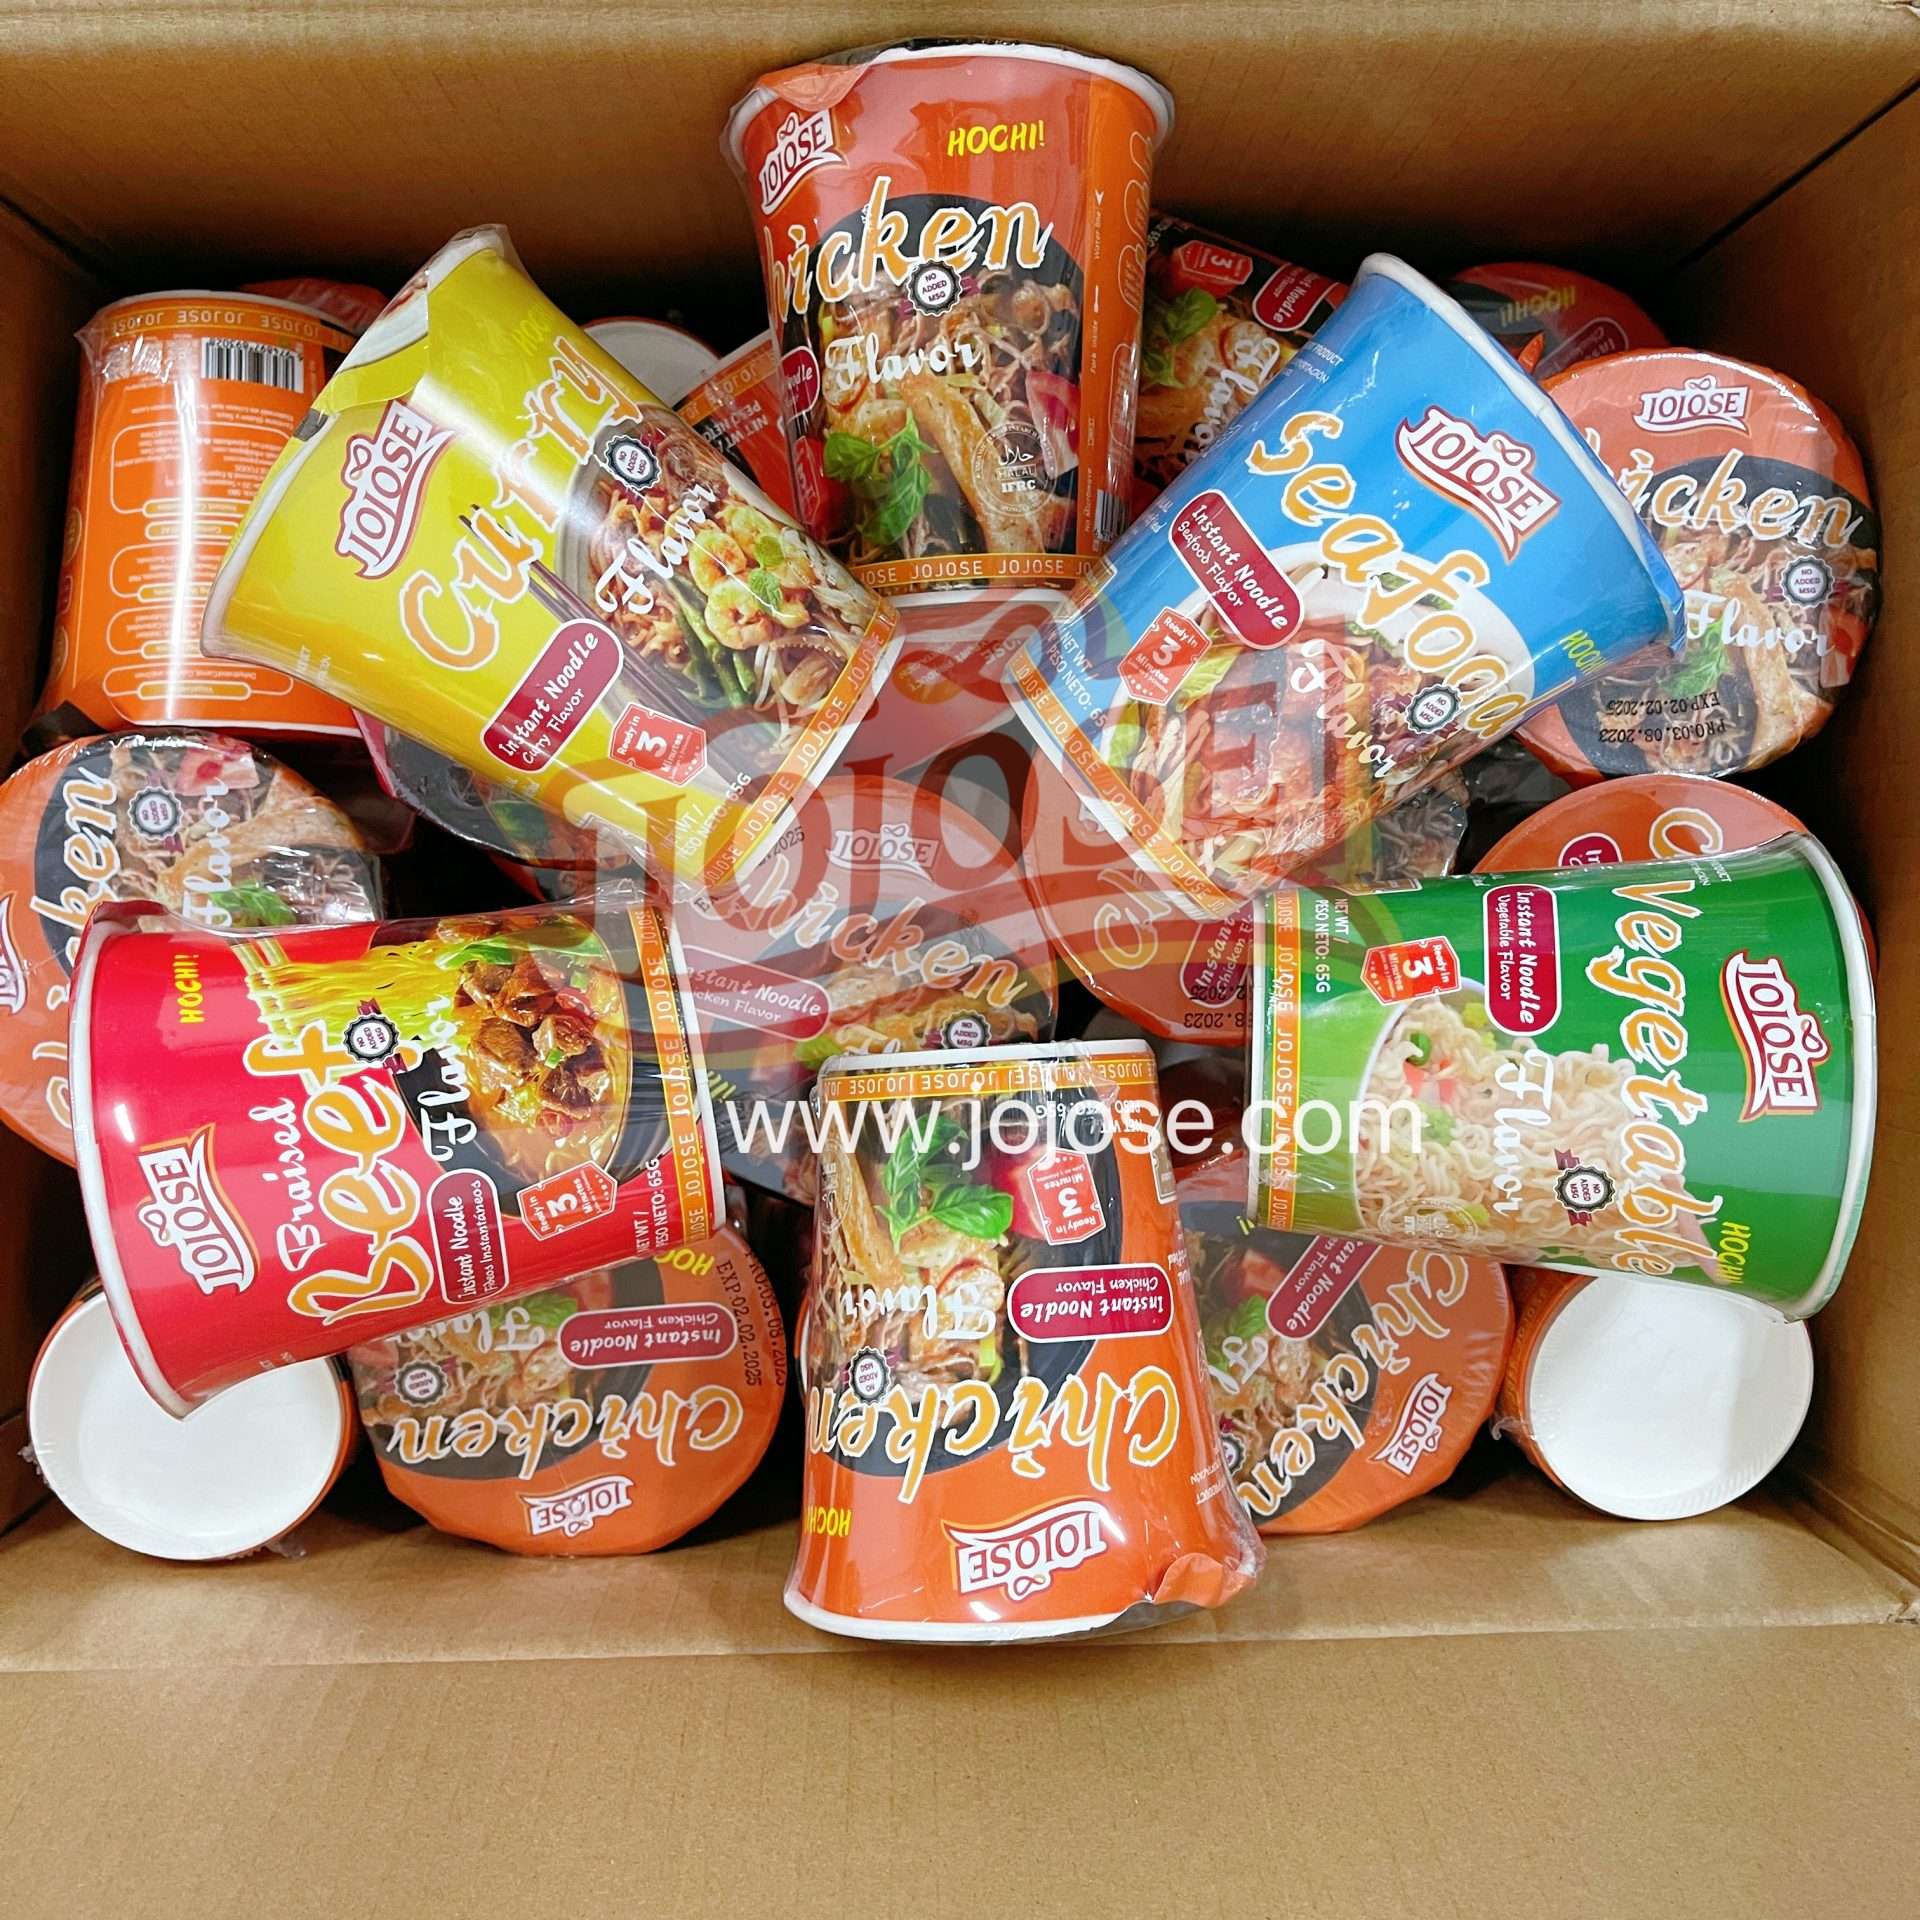 Wholesale Snacks Suppliers Near Me